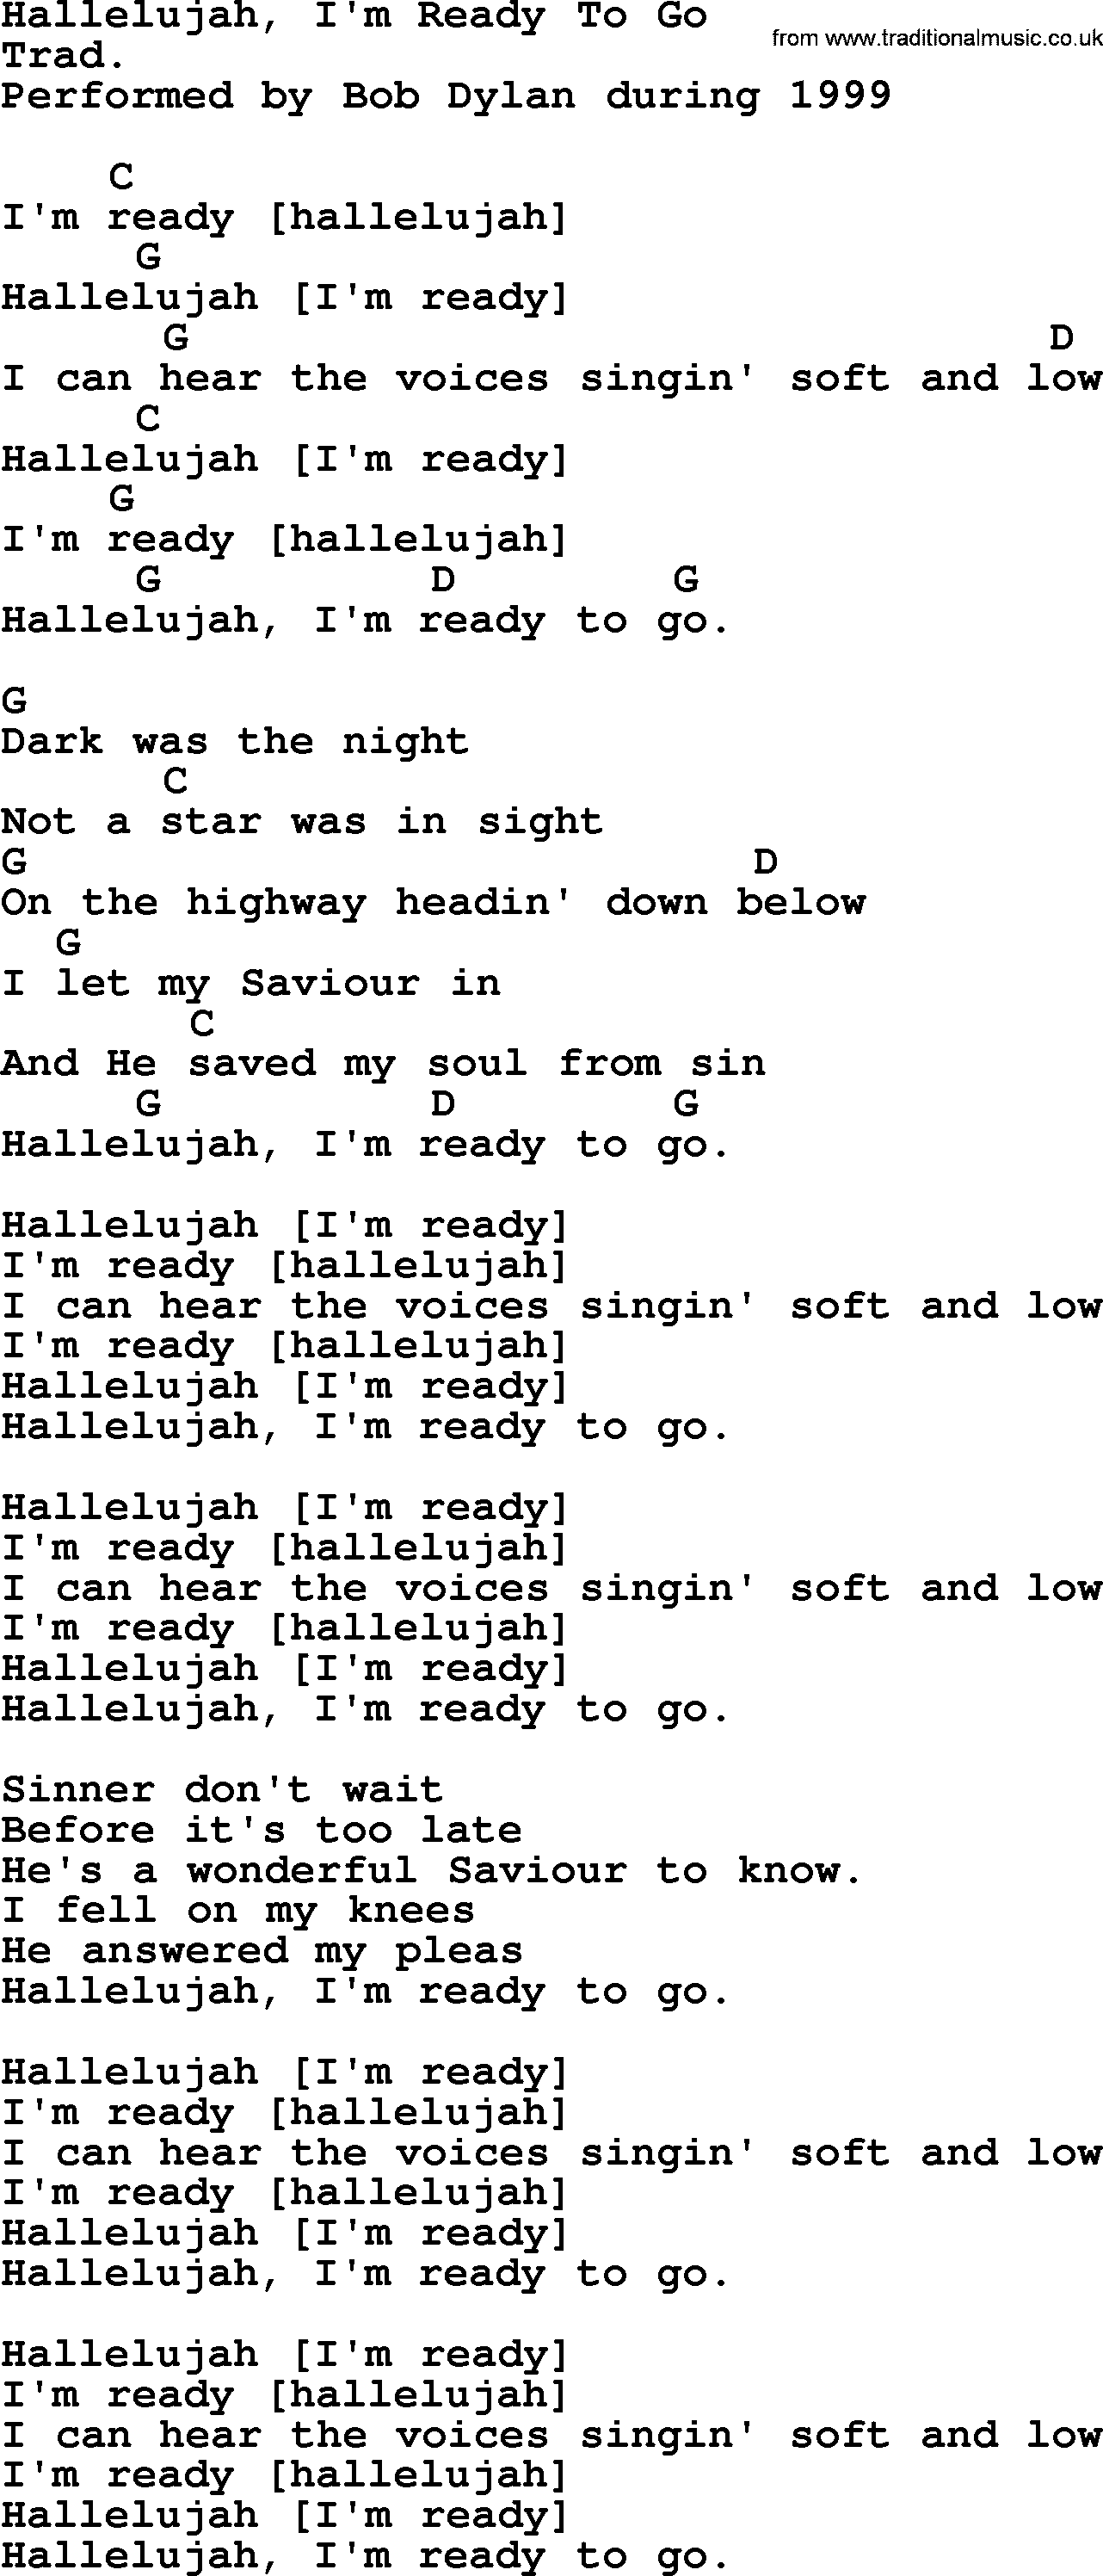 Bob Dylan song, lyrics with chords - Hallelujah, I'm Ready To Go